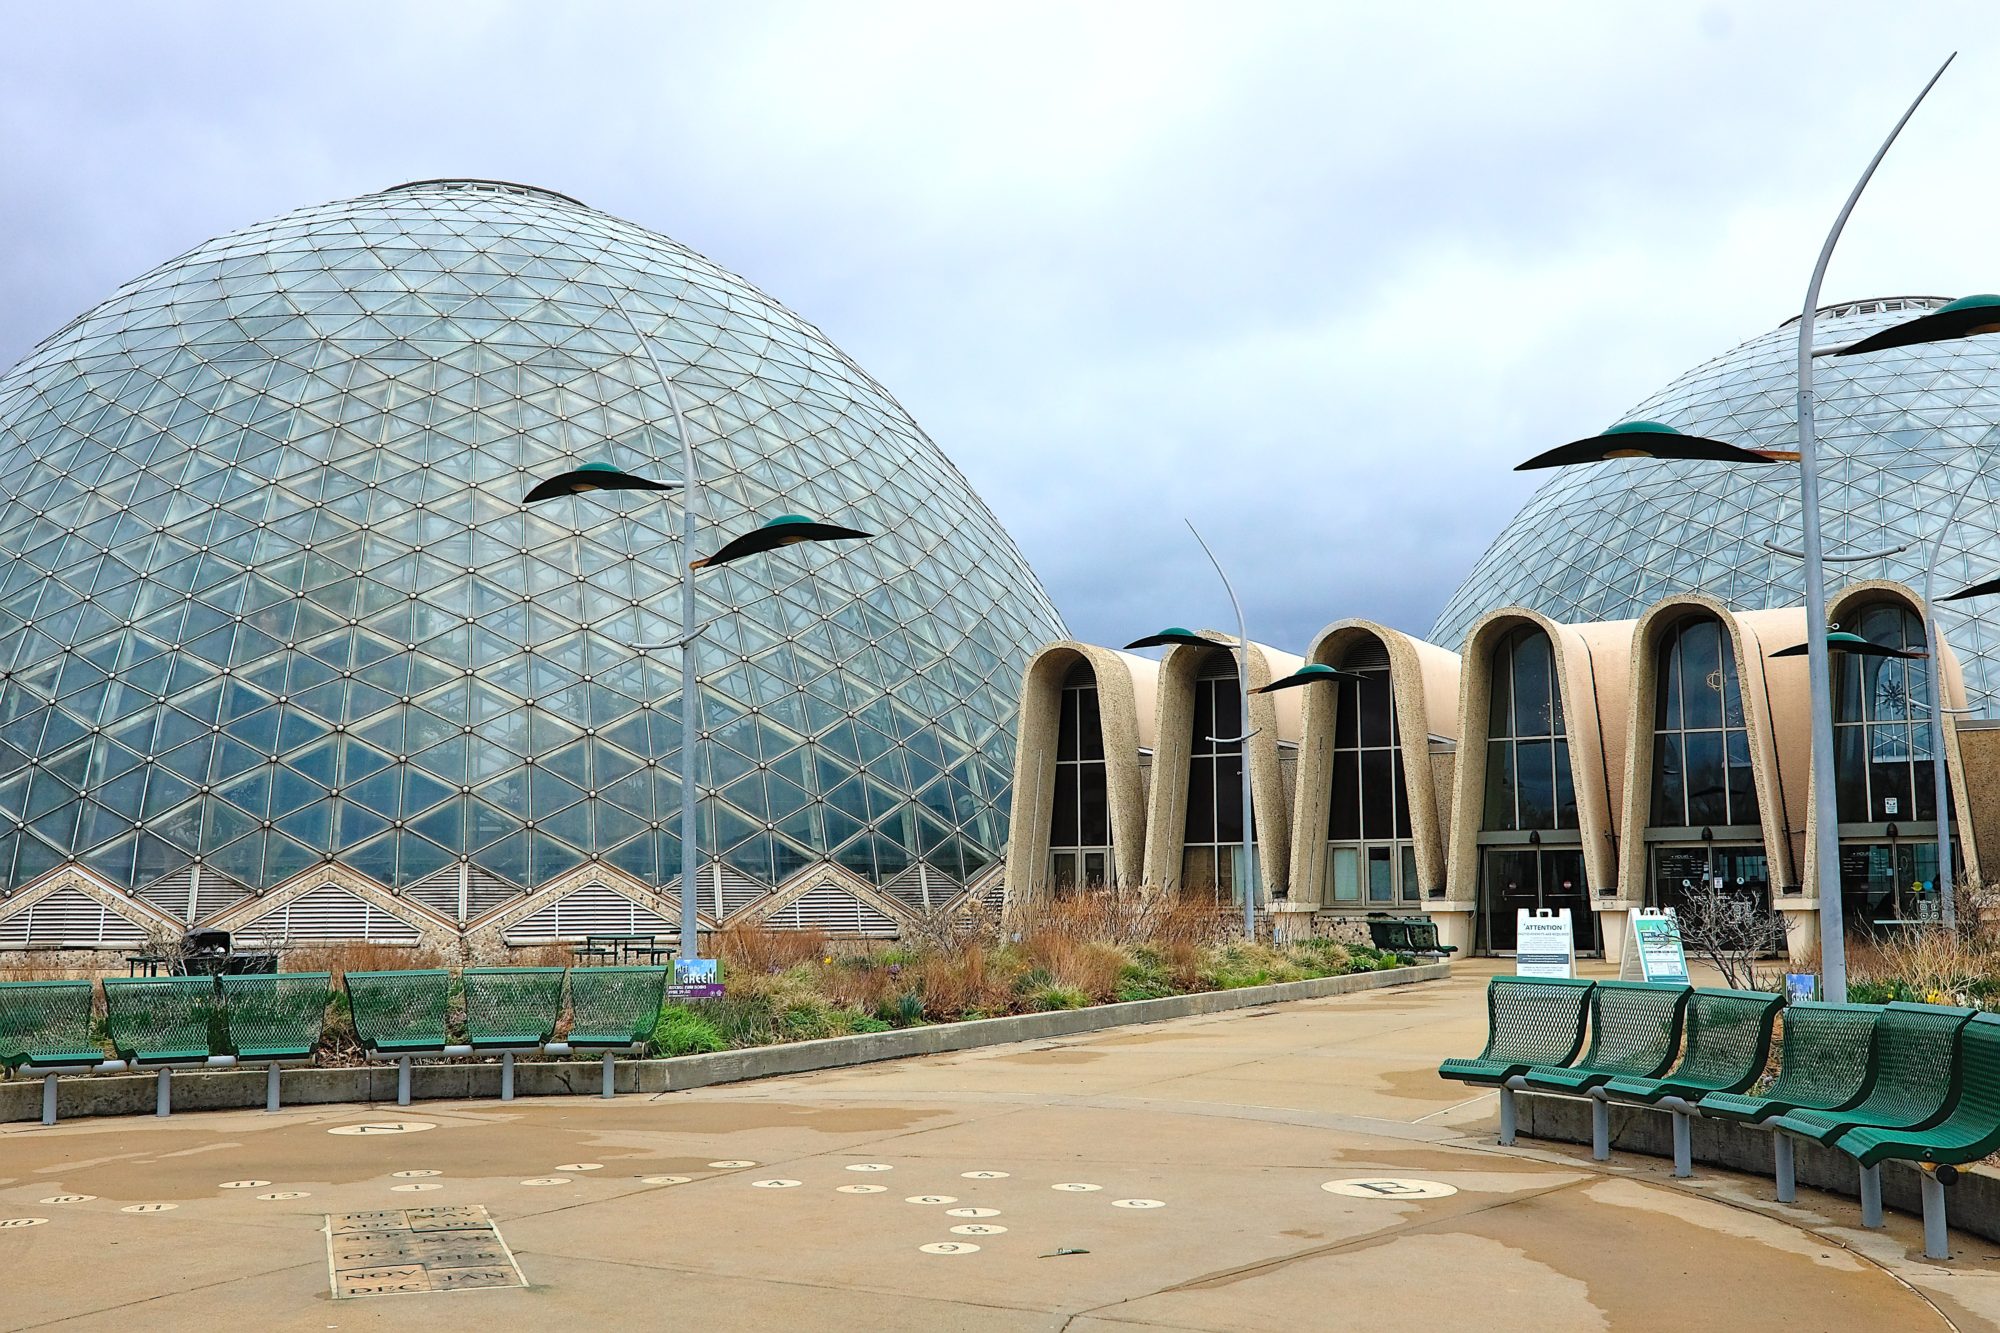 A photo of the Mitchell Park Domes taken near the entrance